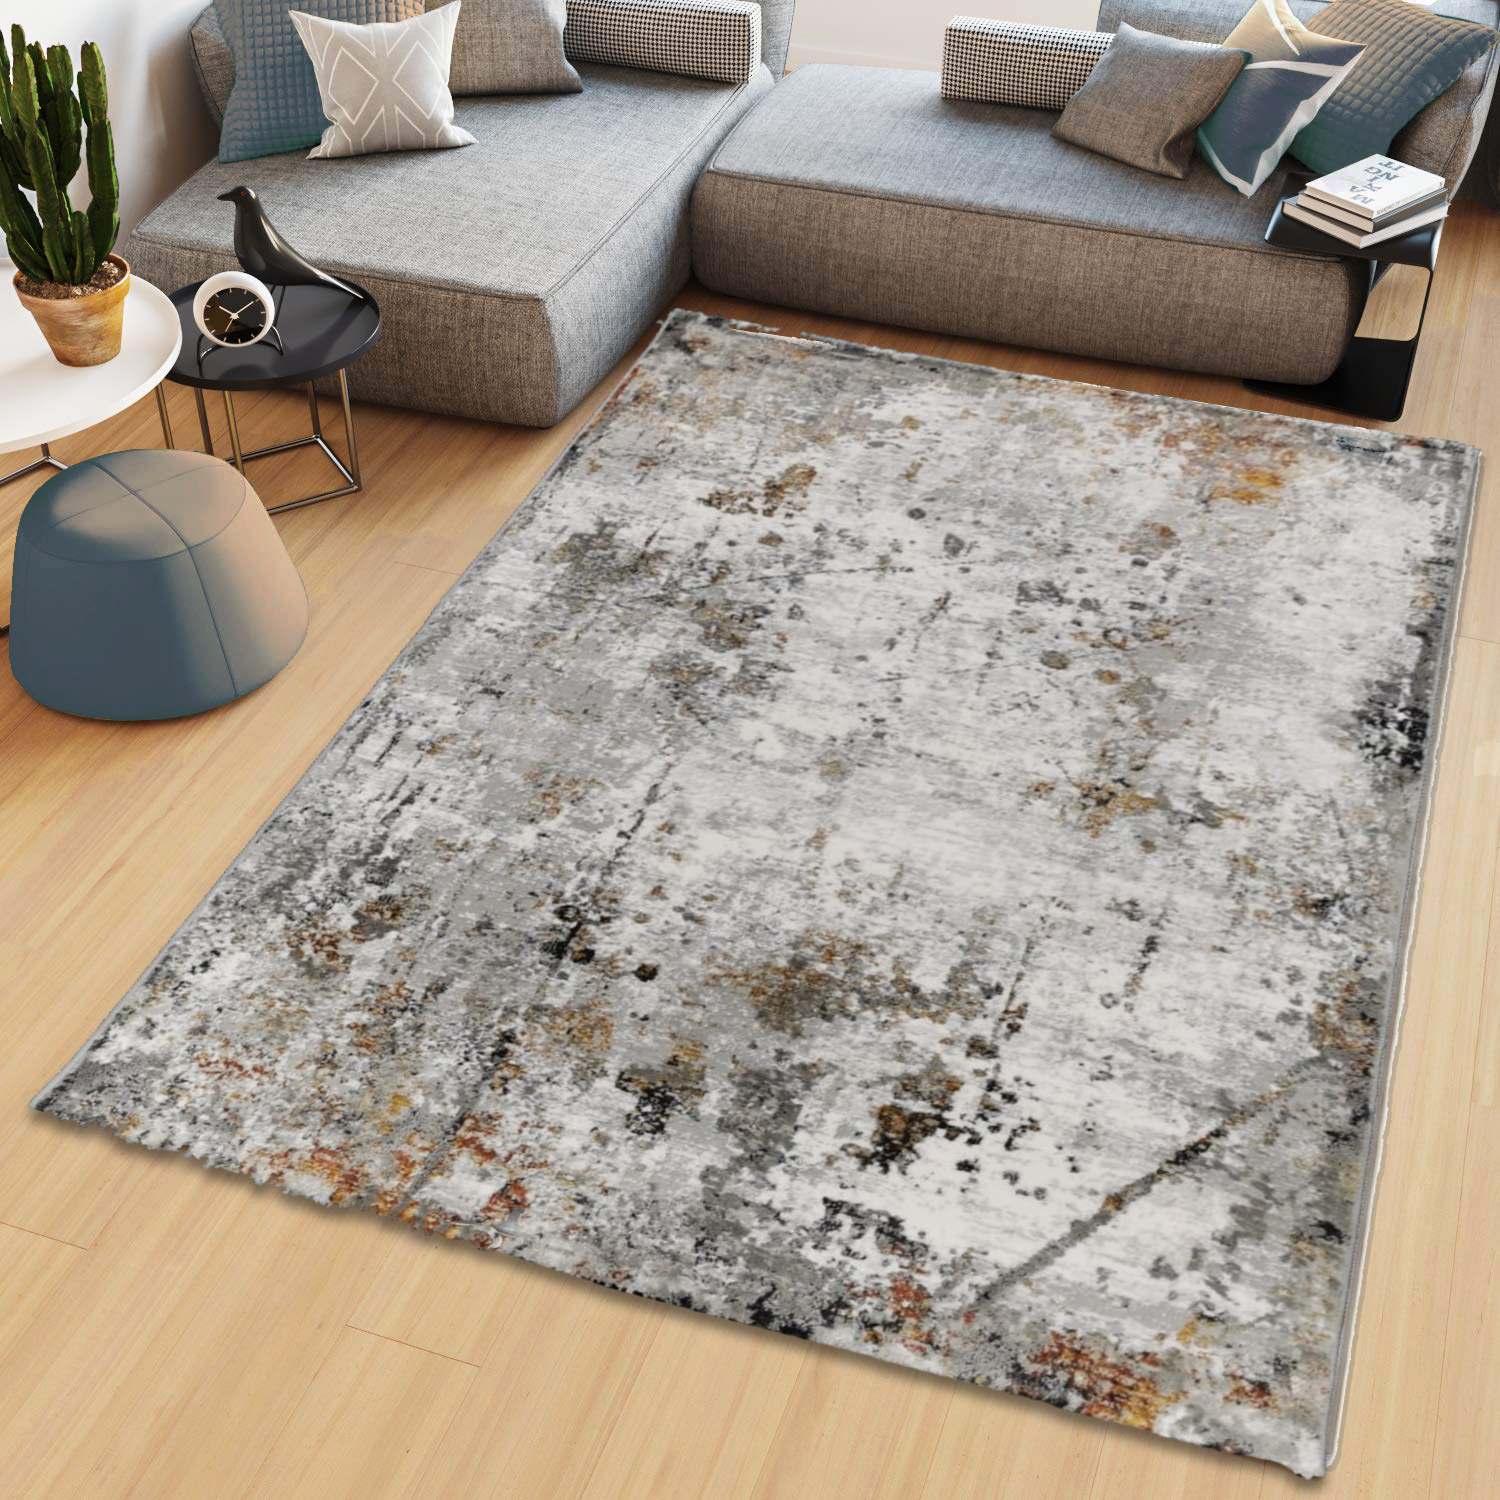 The Home Toscana Rug 1 Shaws Department Stores